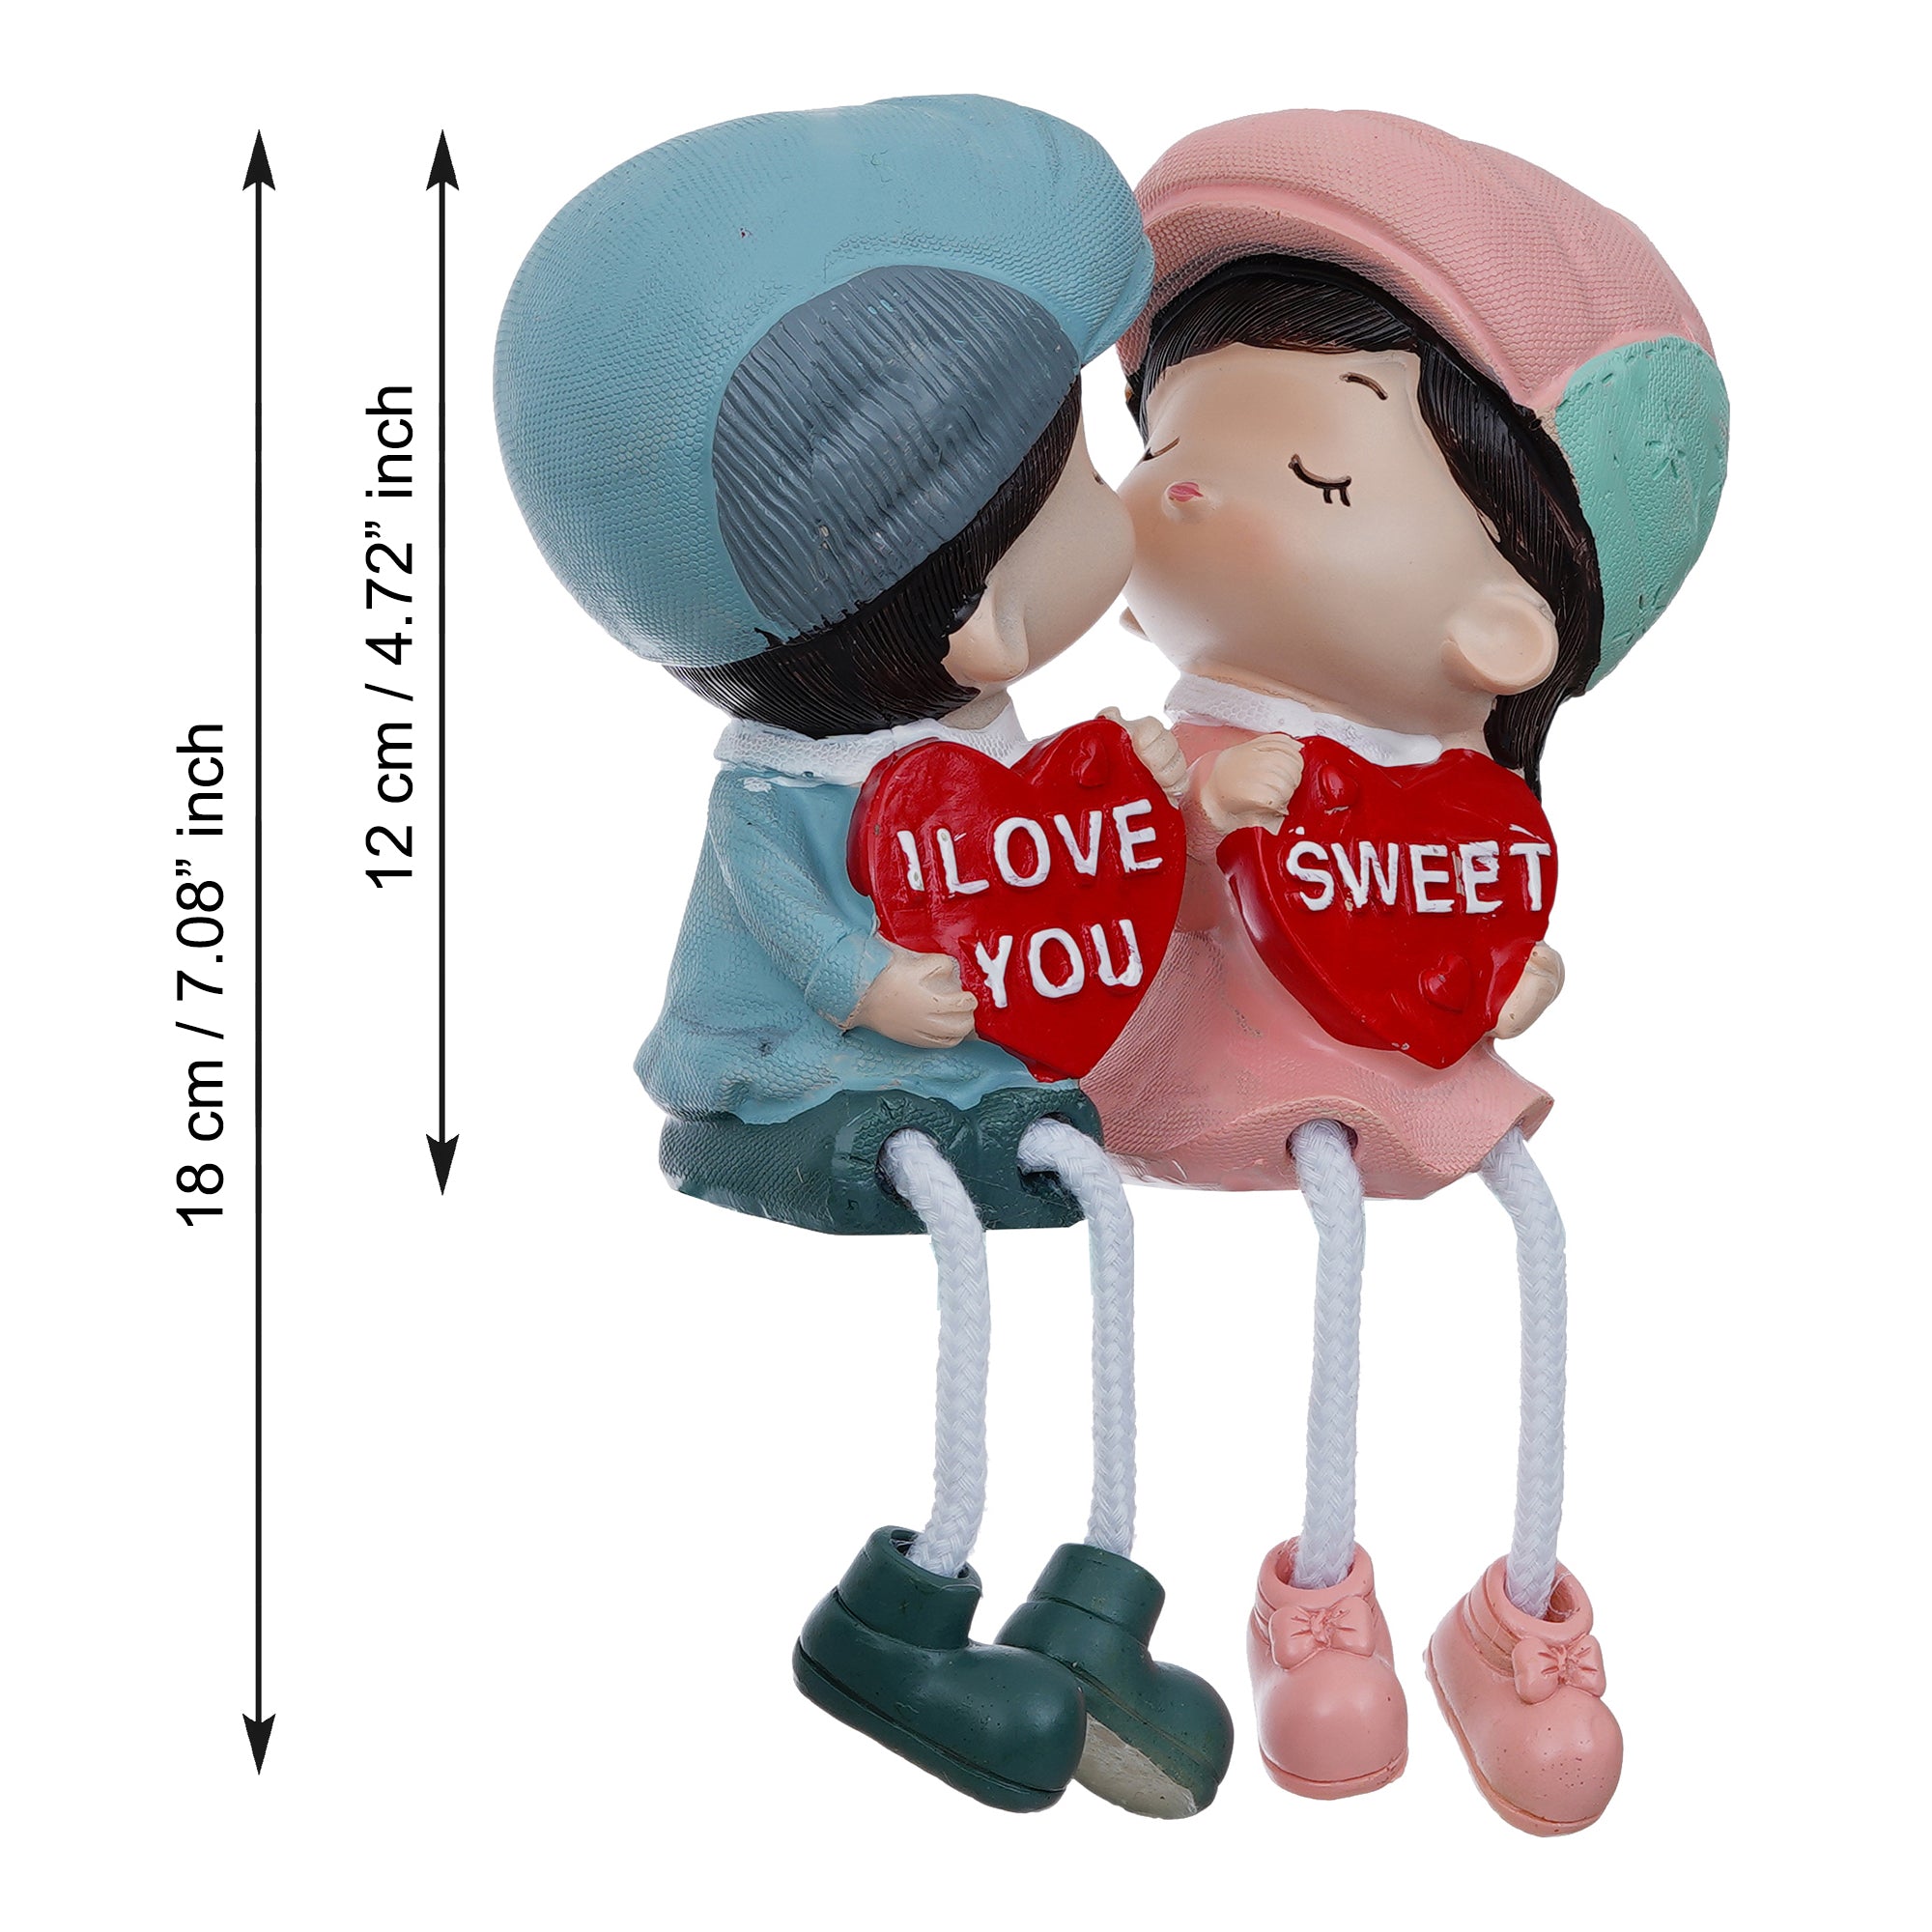 Valentine Combo of "Love" Wooden Photo Frame With Red Stand, Colorful Girl and Boy "Sweet I Love You" Kissing Figurine 4